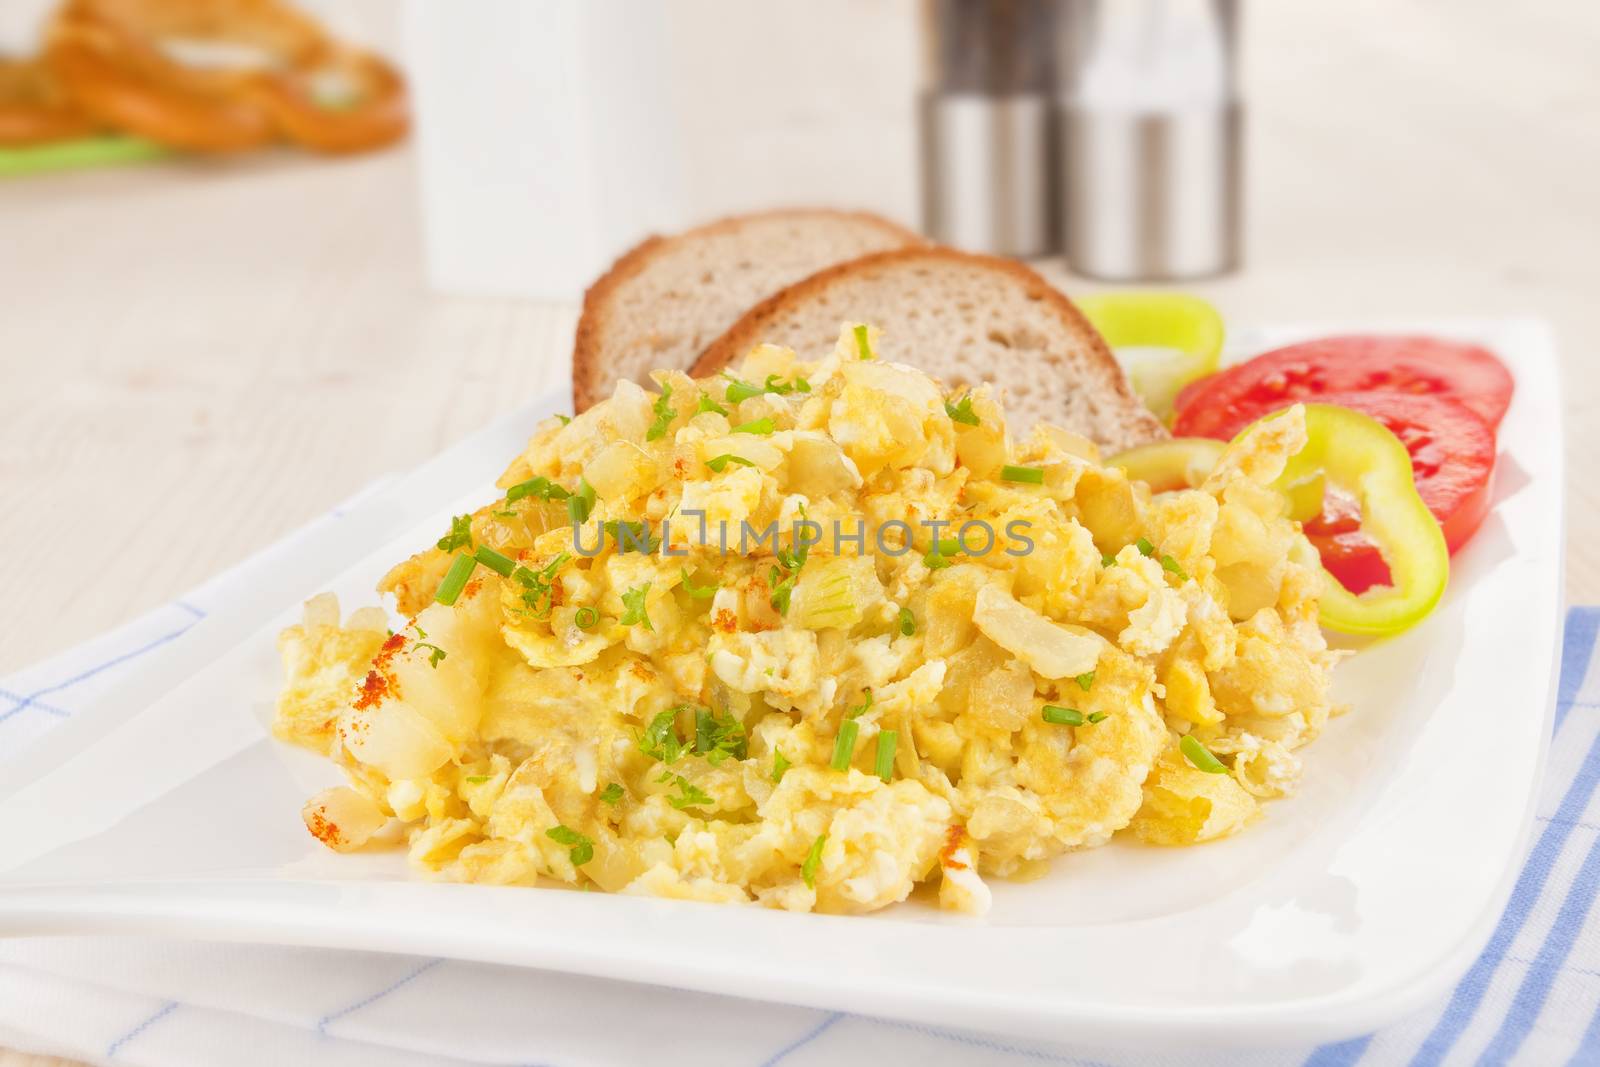 Scrambled eggs with brad slices and fresh vegetable. Luxurious breakfast.